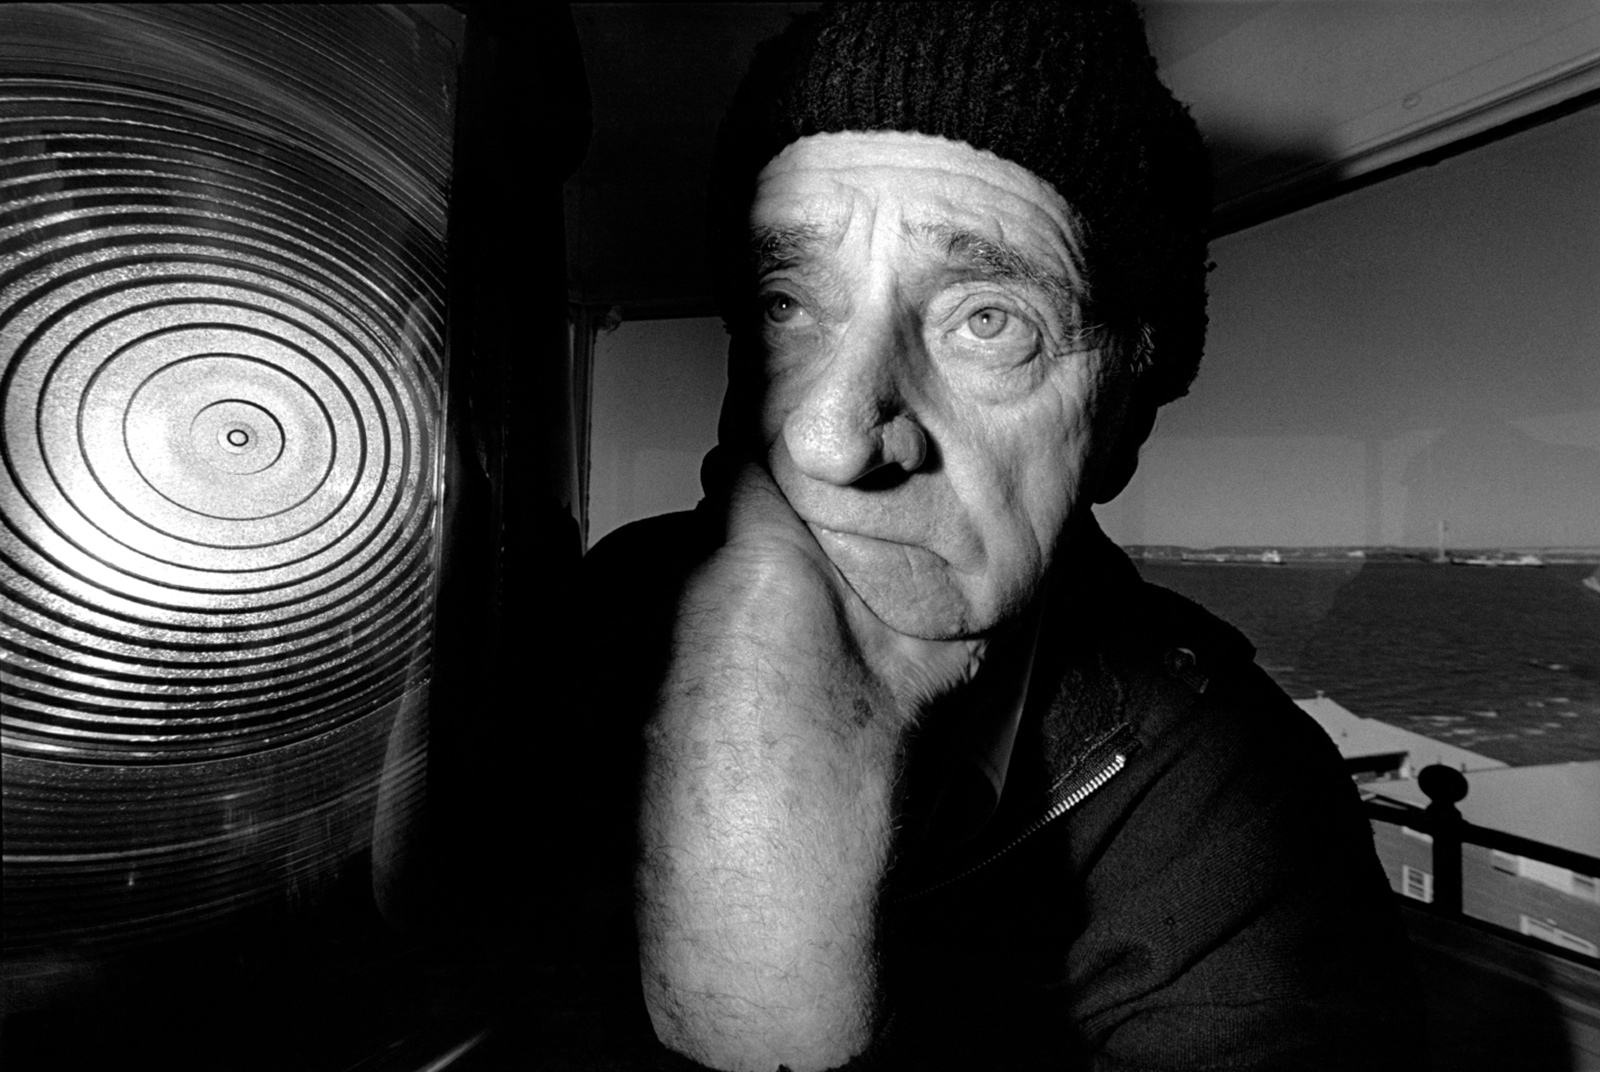 Frank Schubert, aged eighty, when he was the last lighthouse keeper on the Eastern Seaboard, Brooklyn, 1996